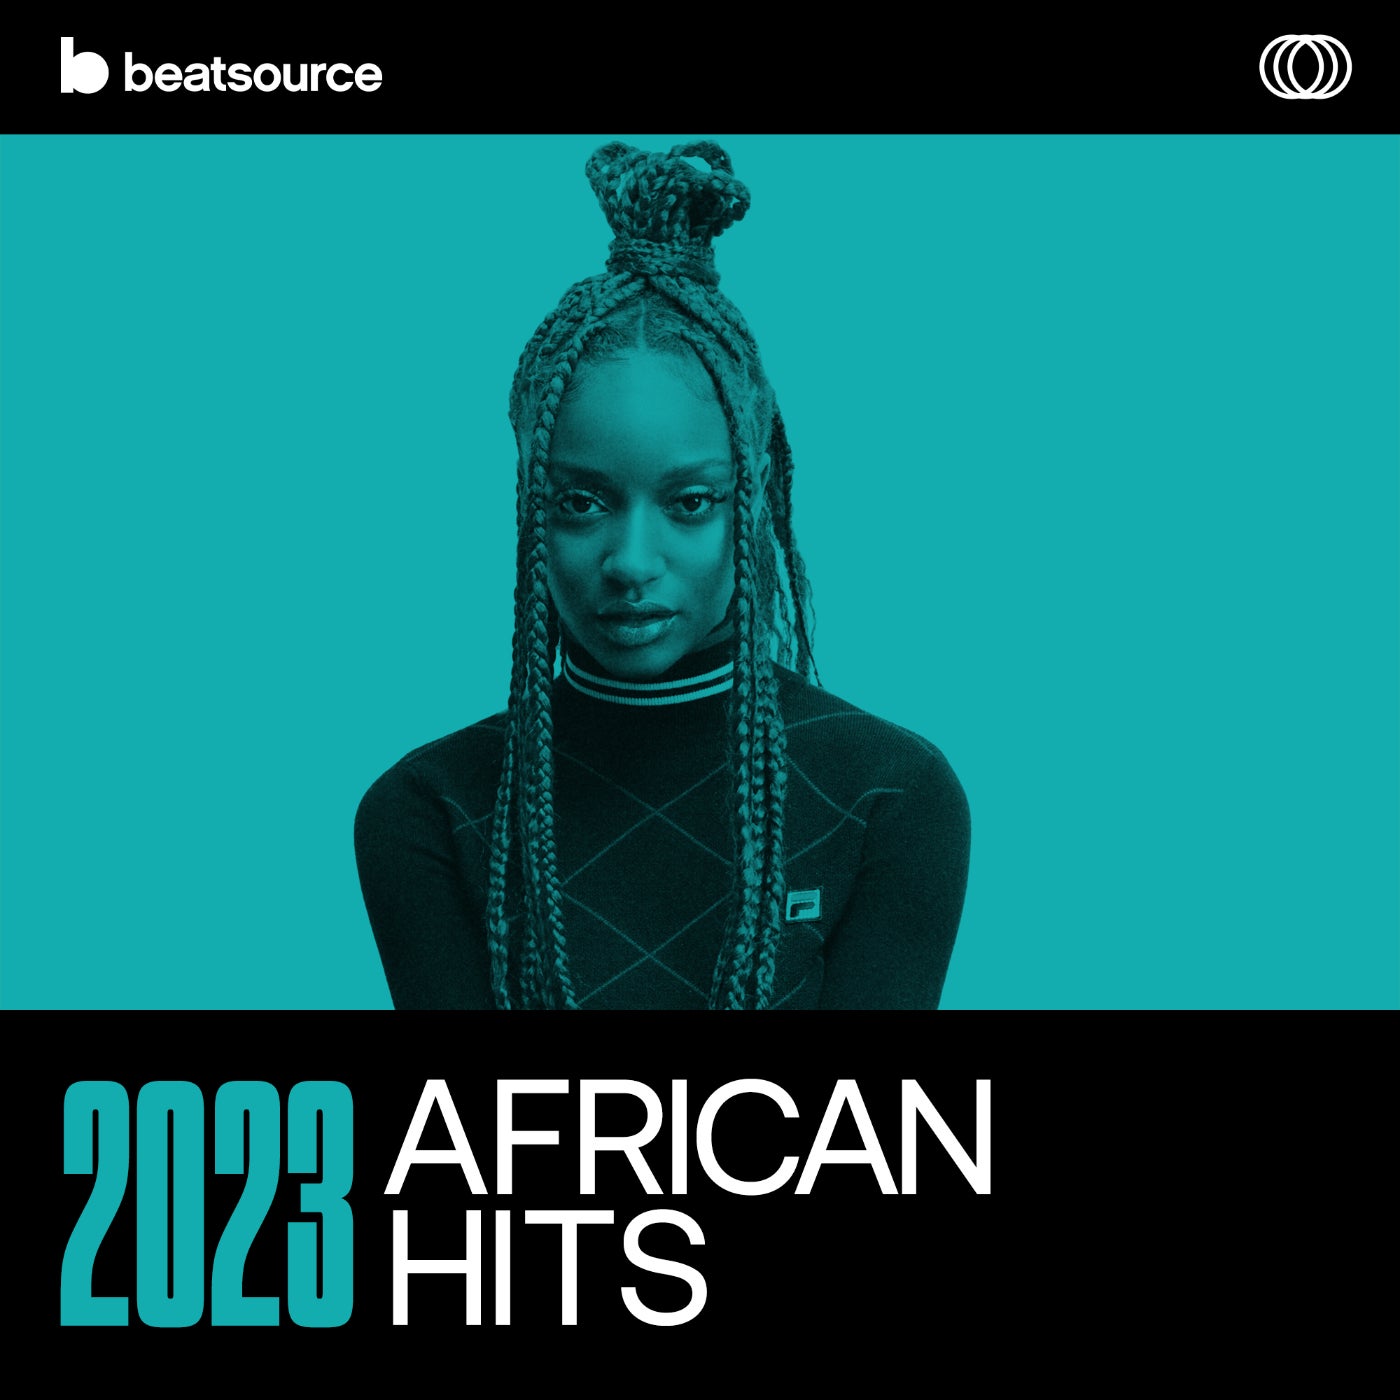 2023 African Hits Playlist for DJs on Beatsource